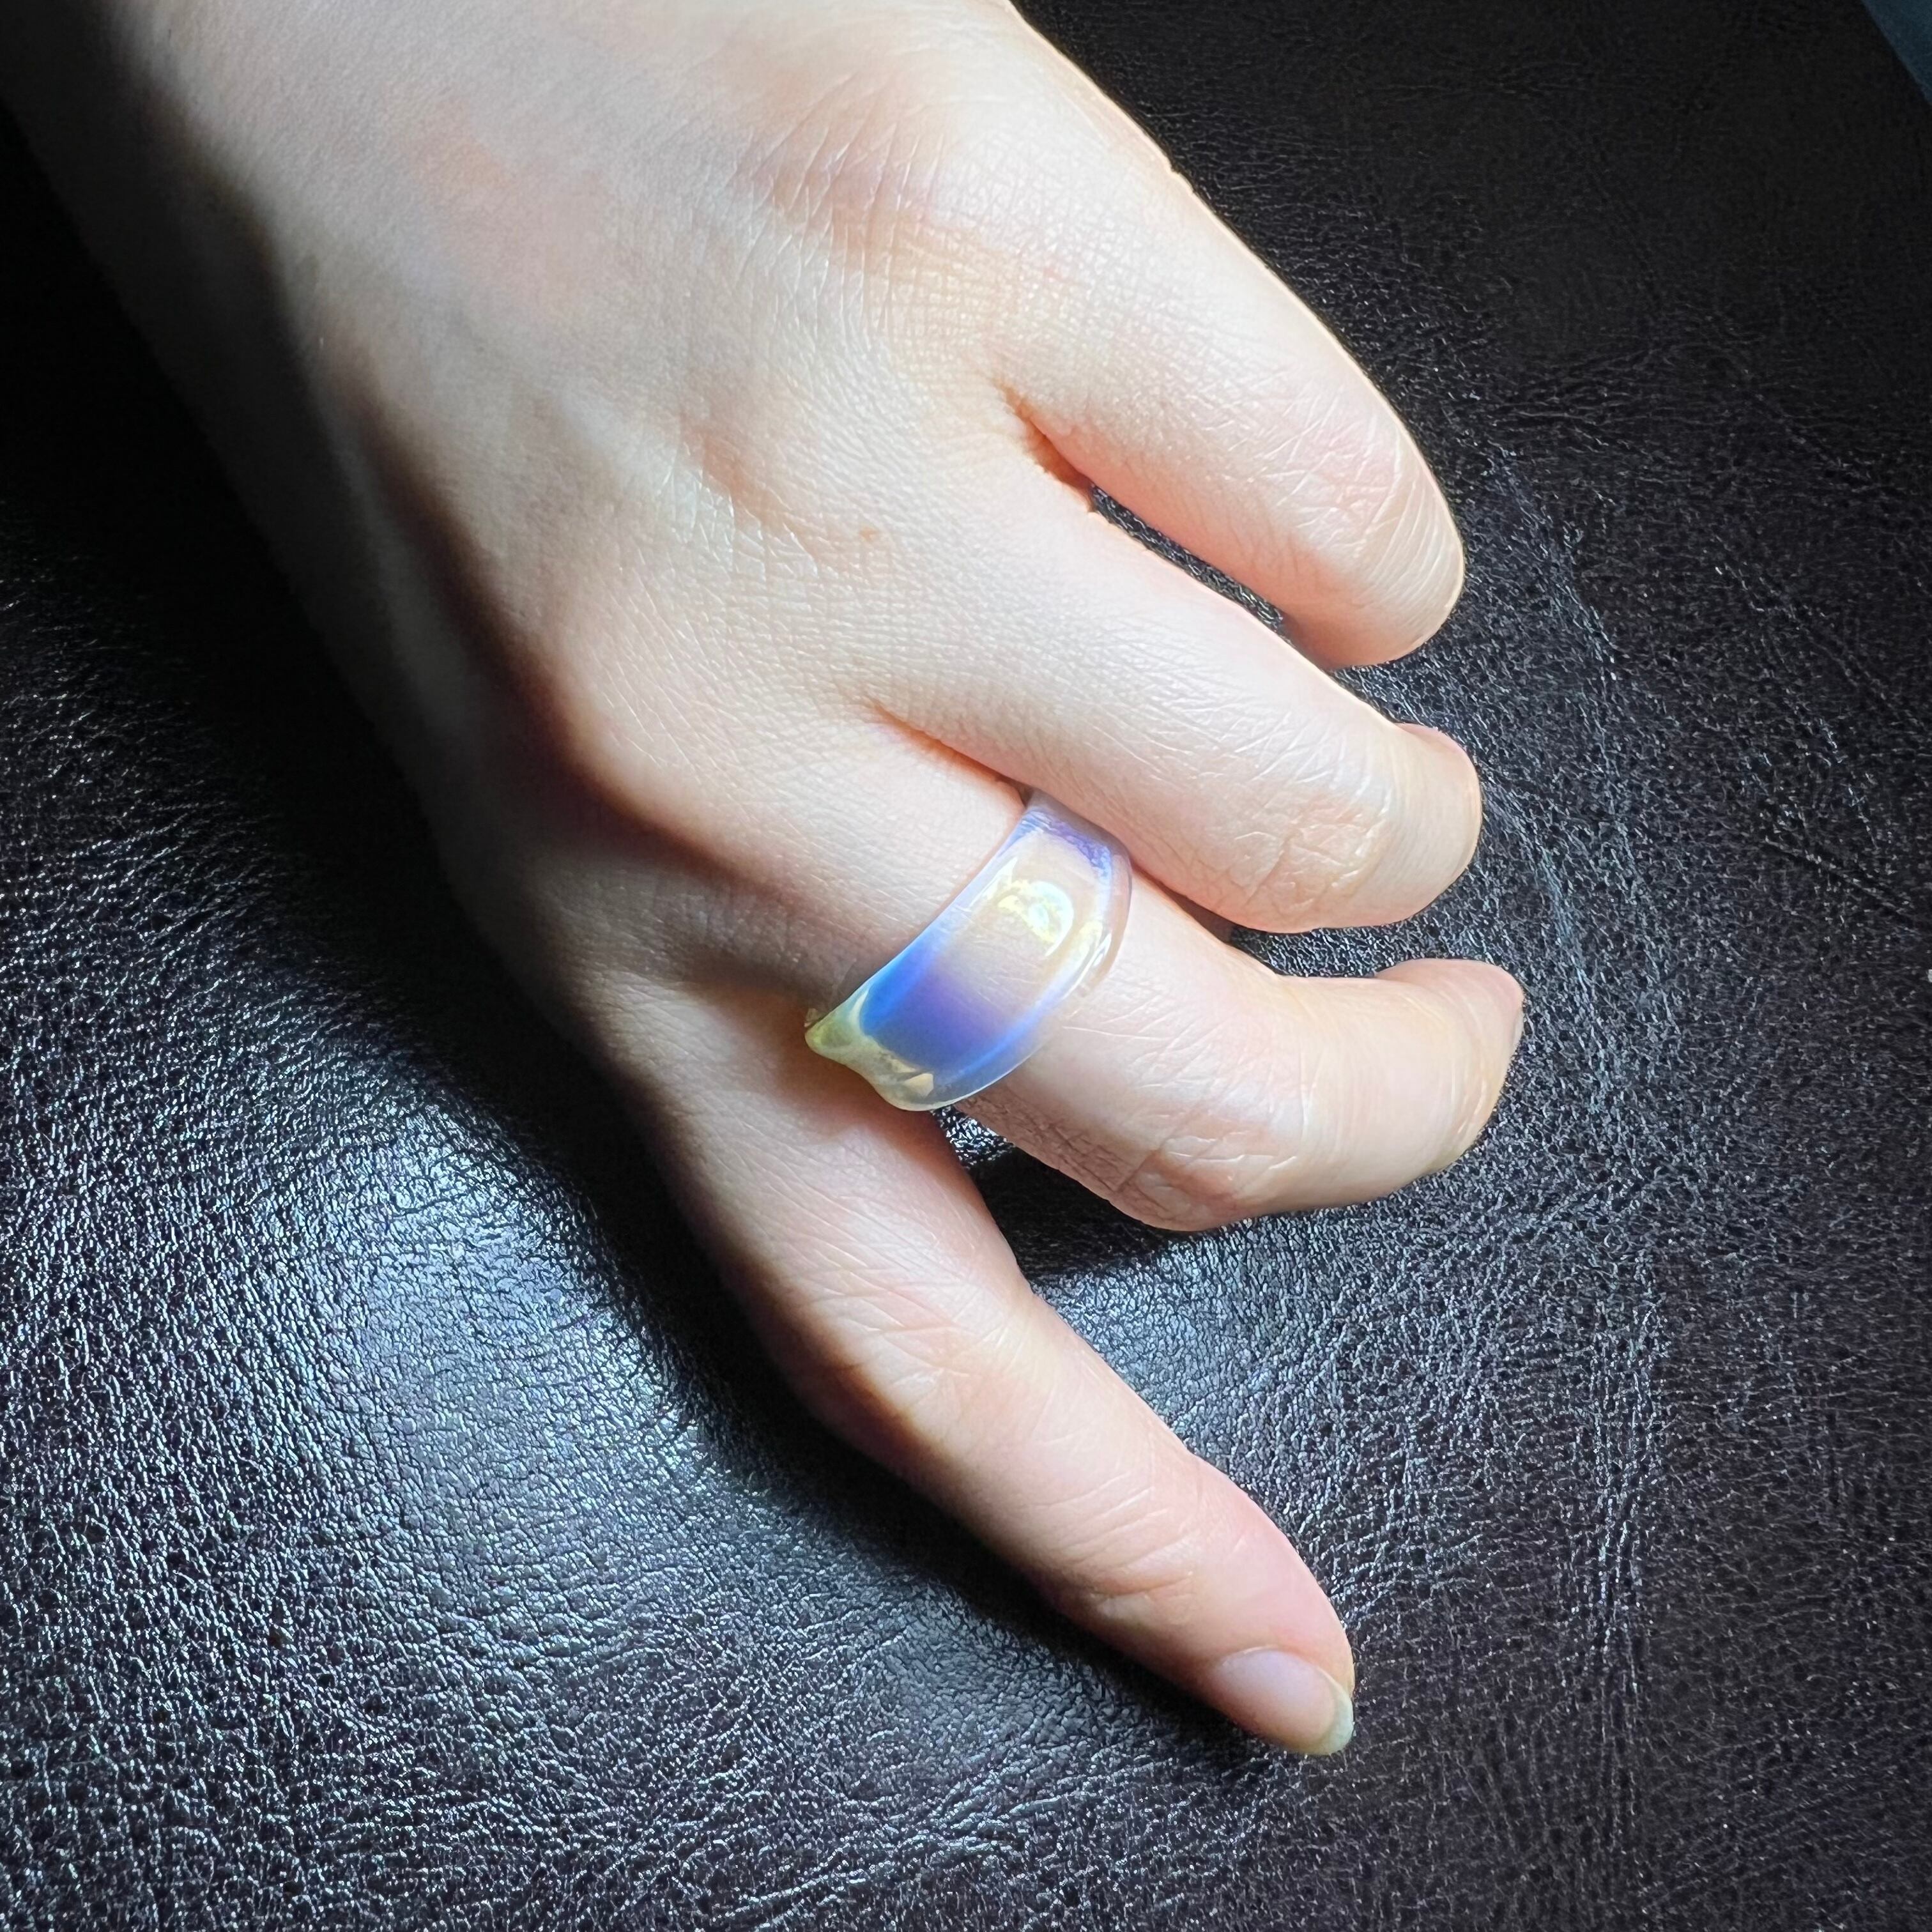 ○ glass ring ○ 澄　sumi 23a